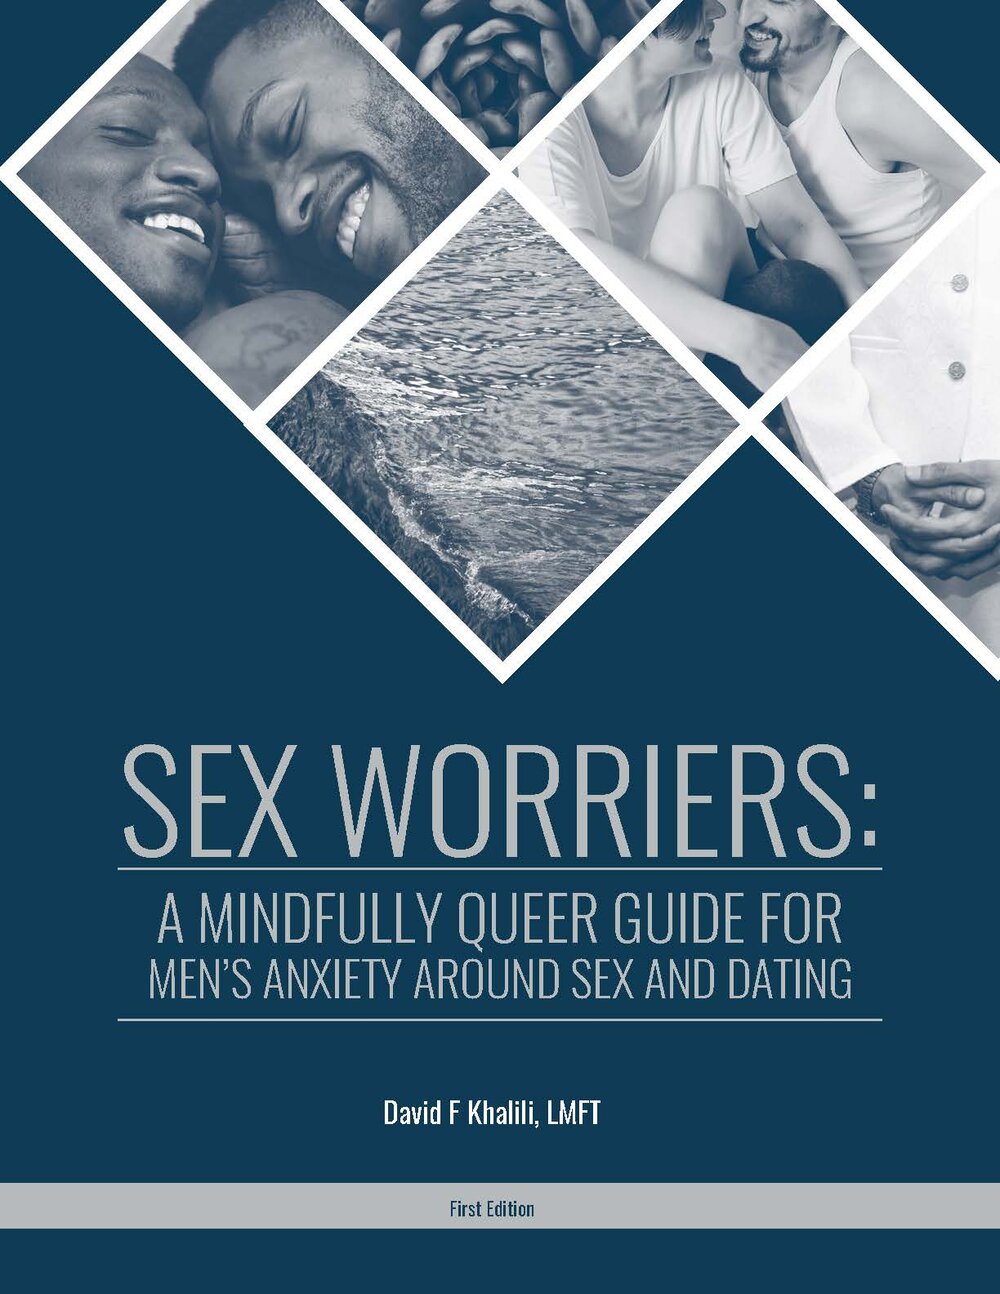 The Better Sex Through Mindfulness Workbook: A Guide to